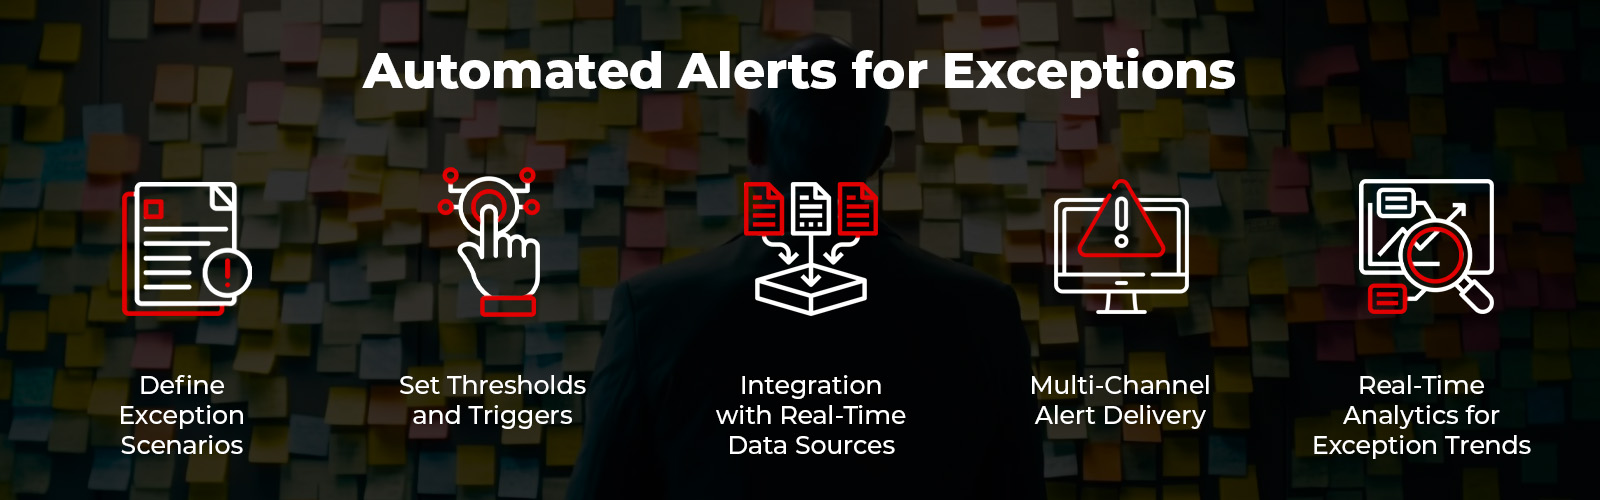 Automated Alerts for Exemptions in delivery tracking software